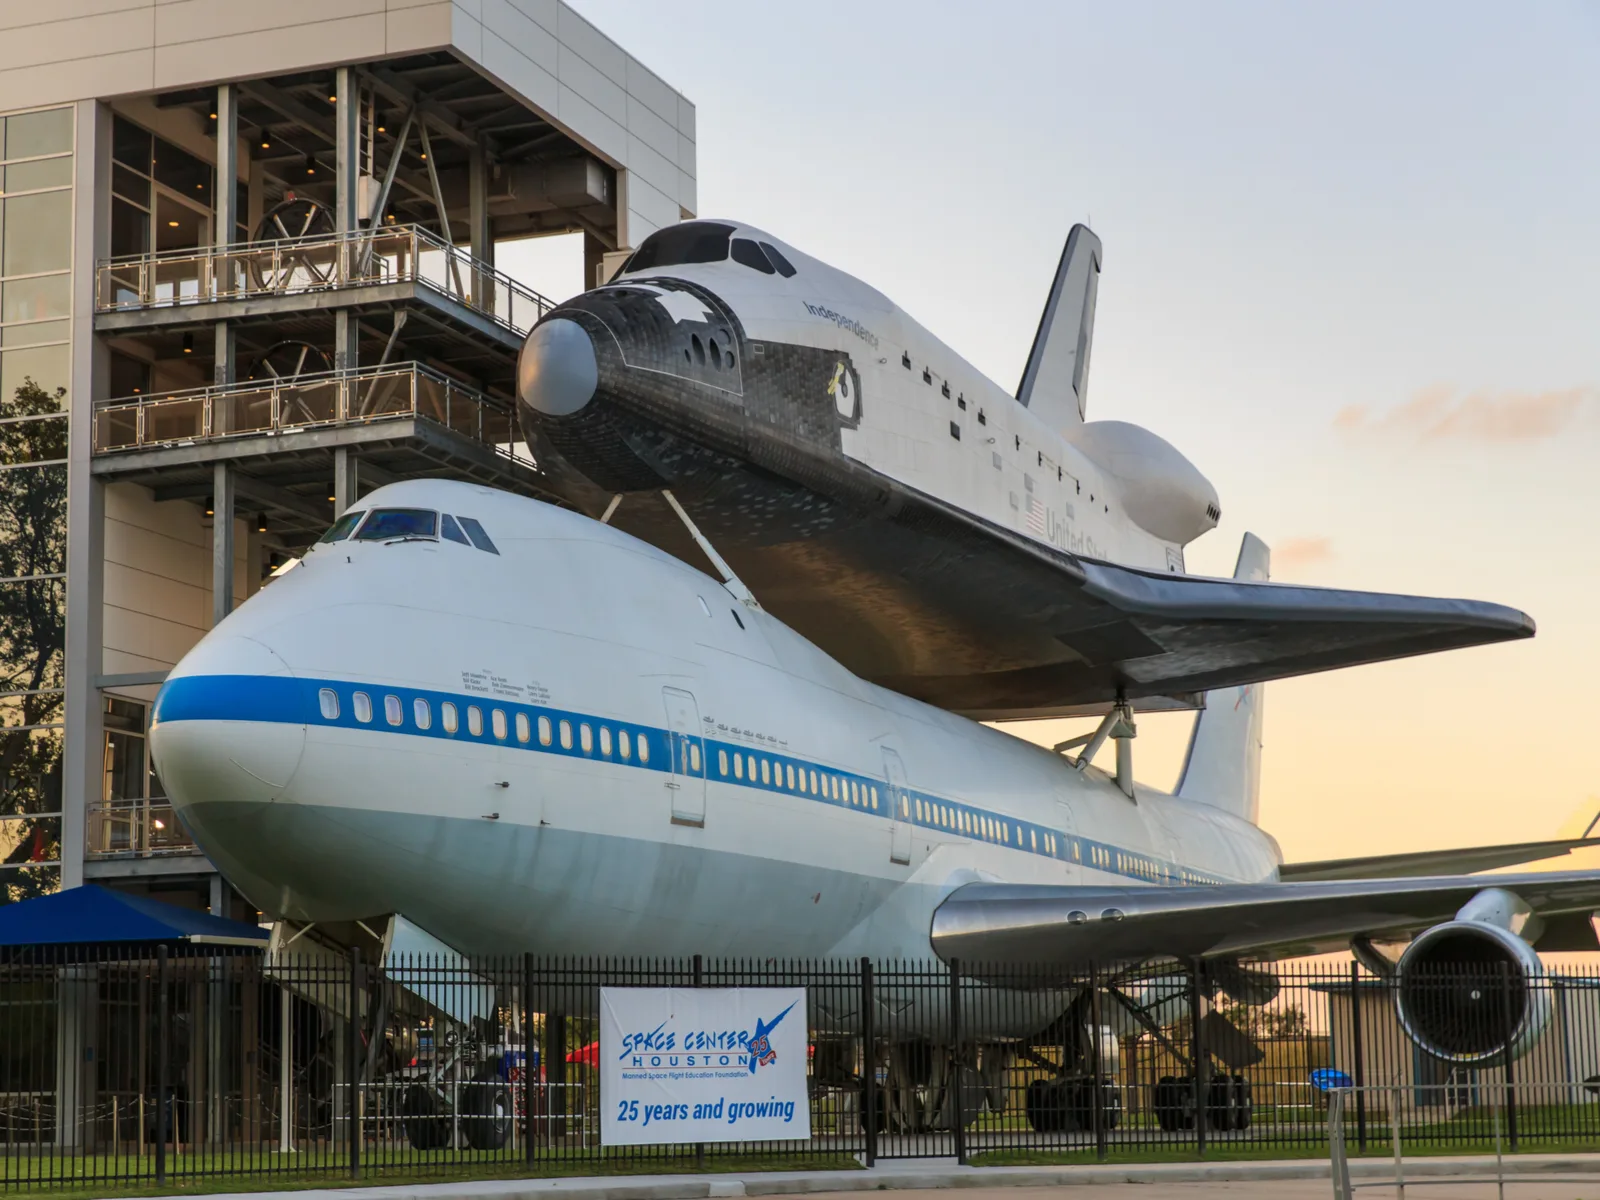 Space Center in Houston pictured with the shuttle on the back of a 747